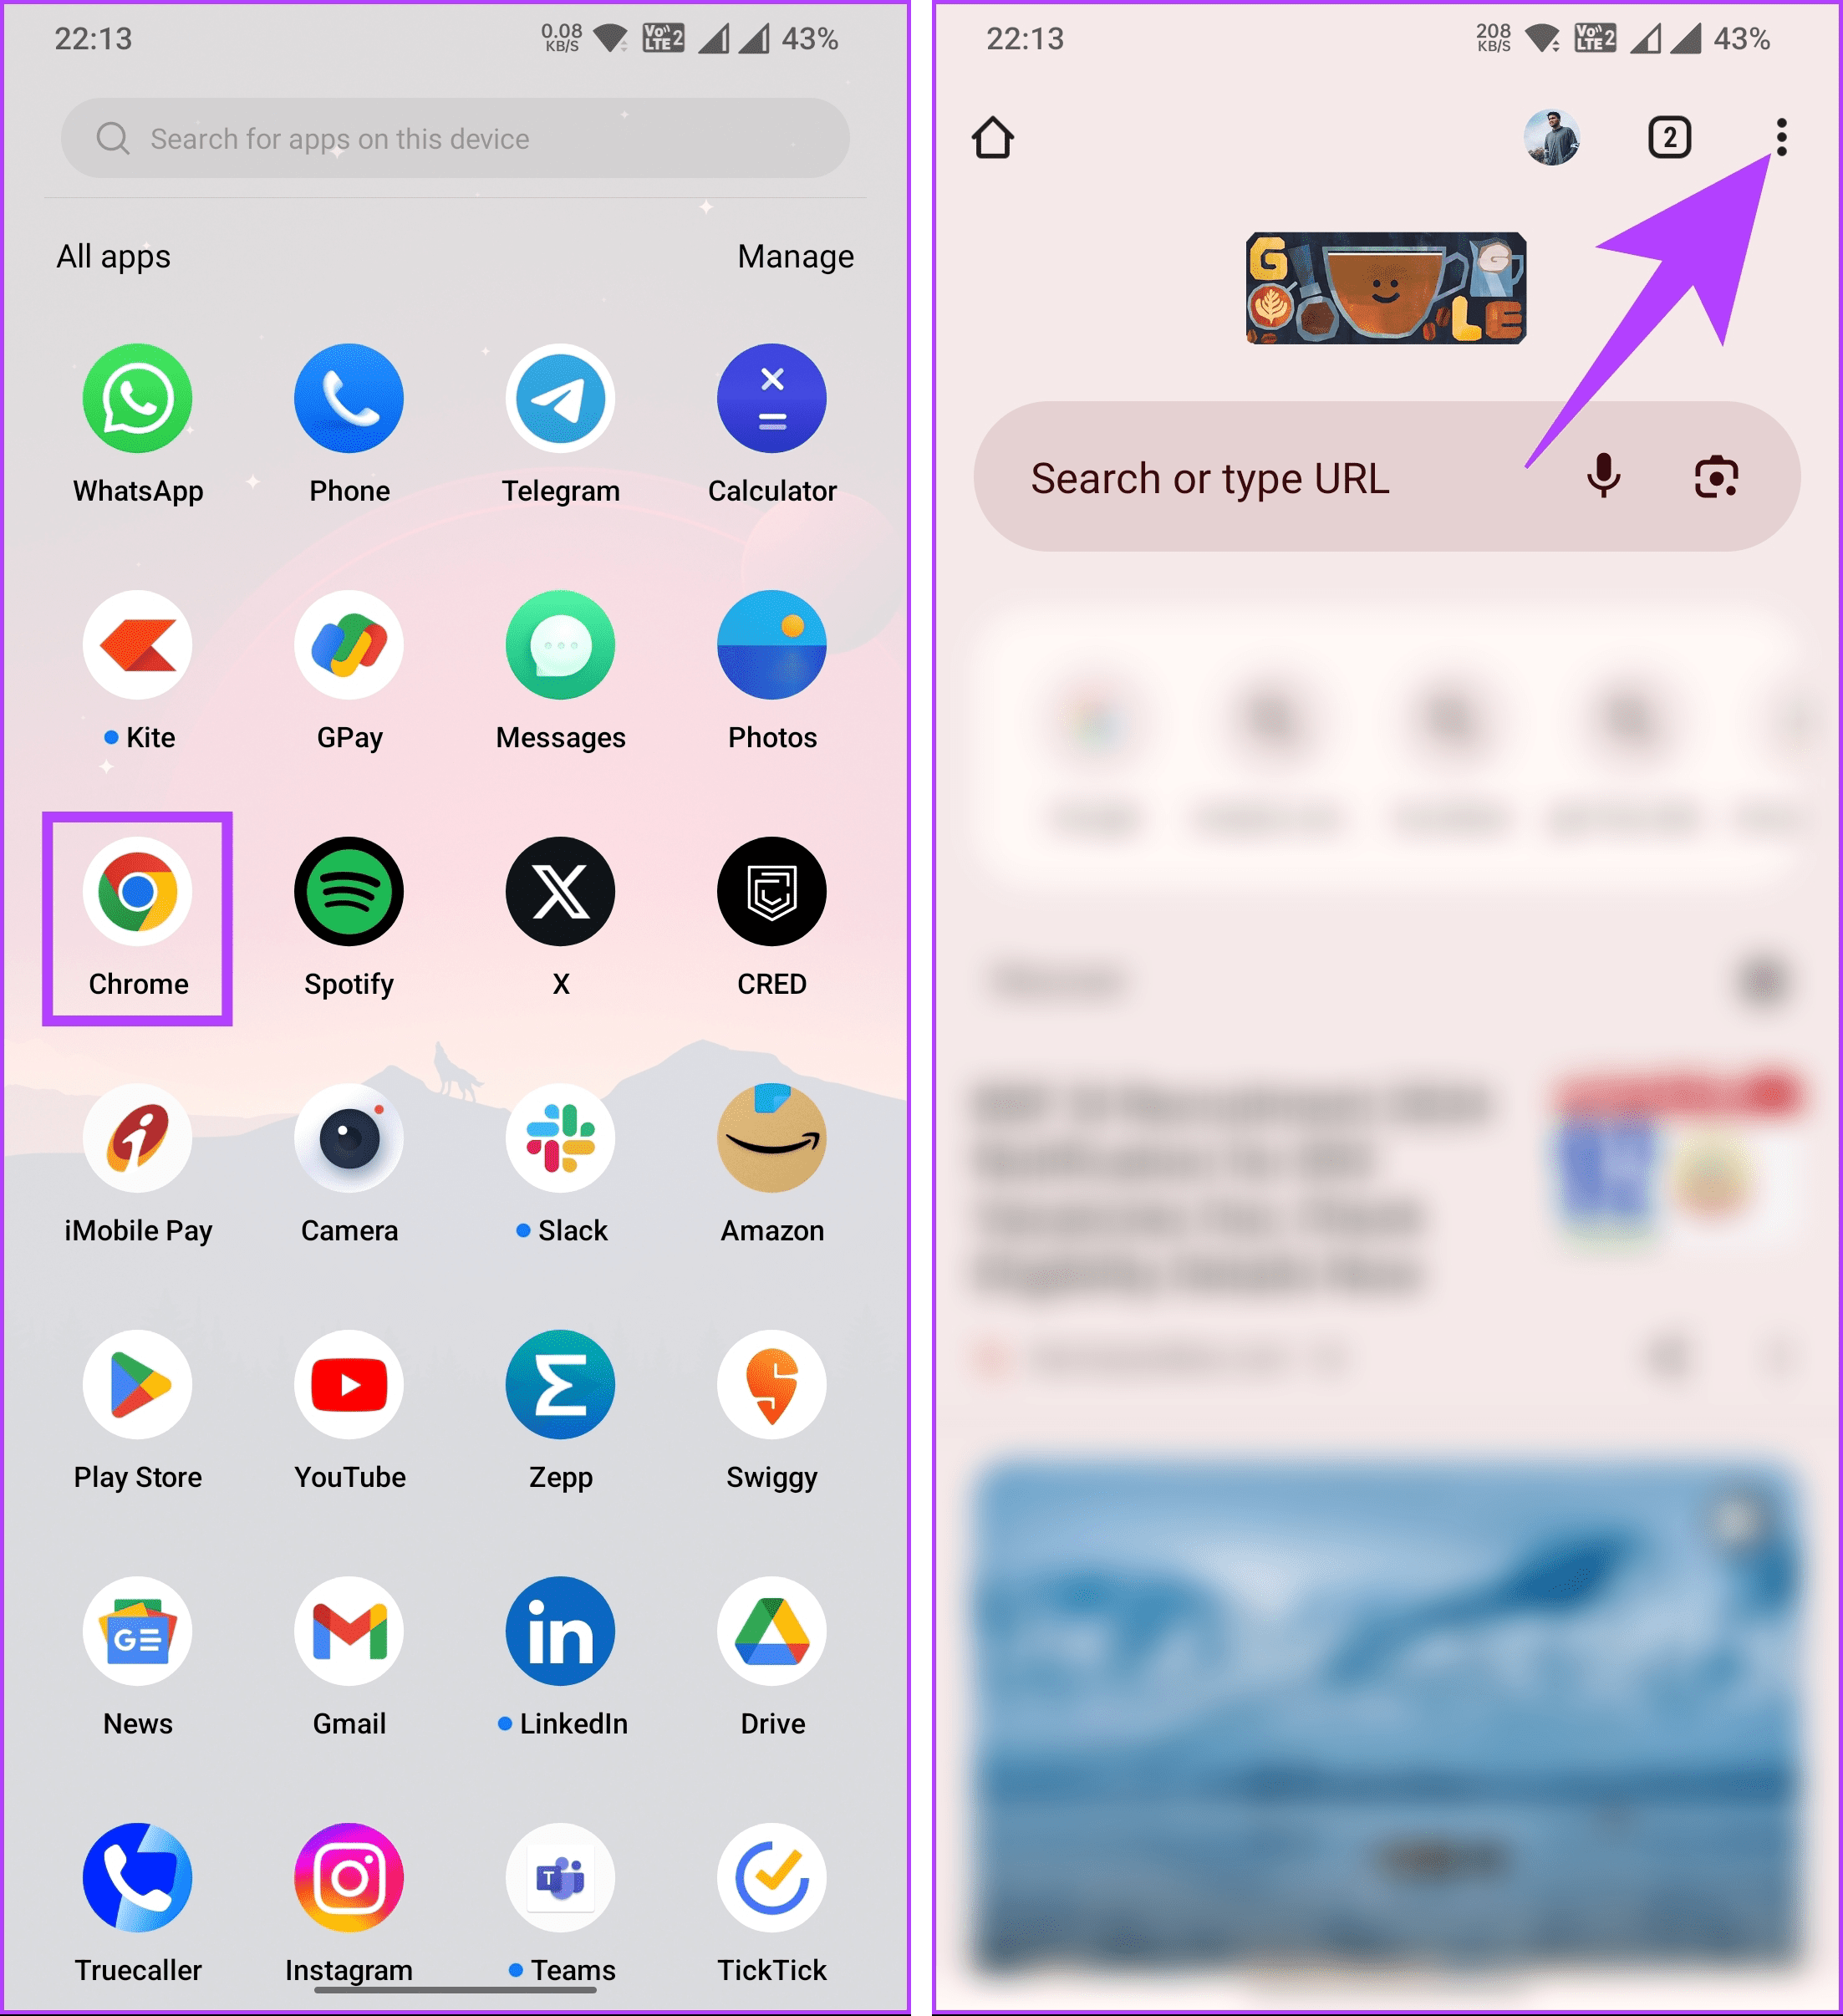 tap on the three-dot icon